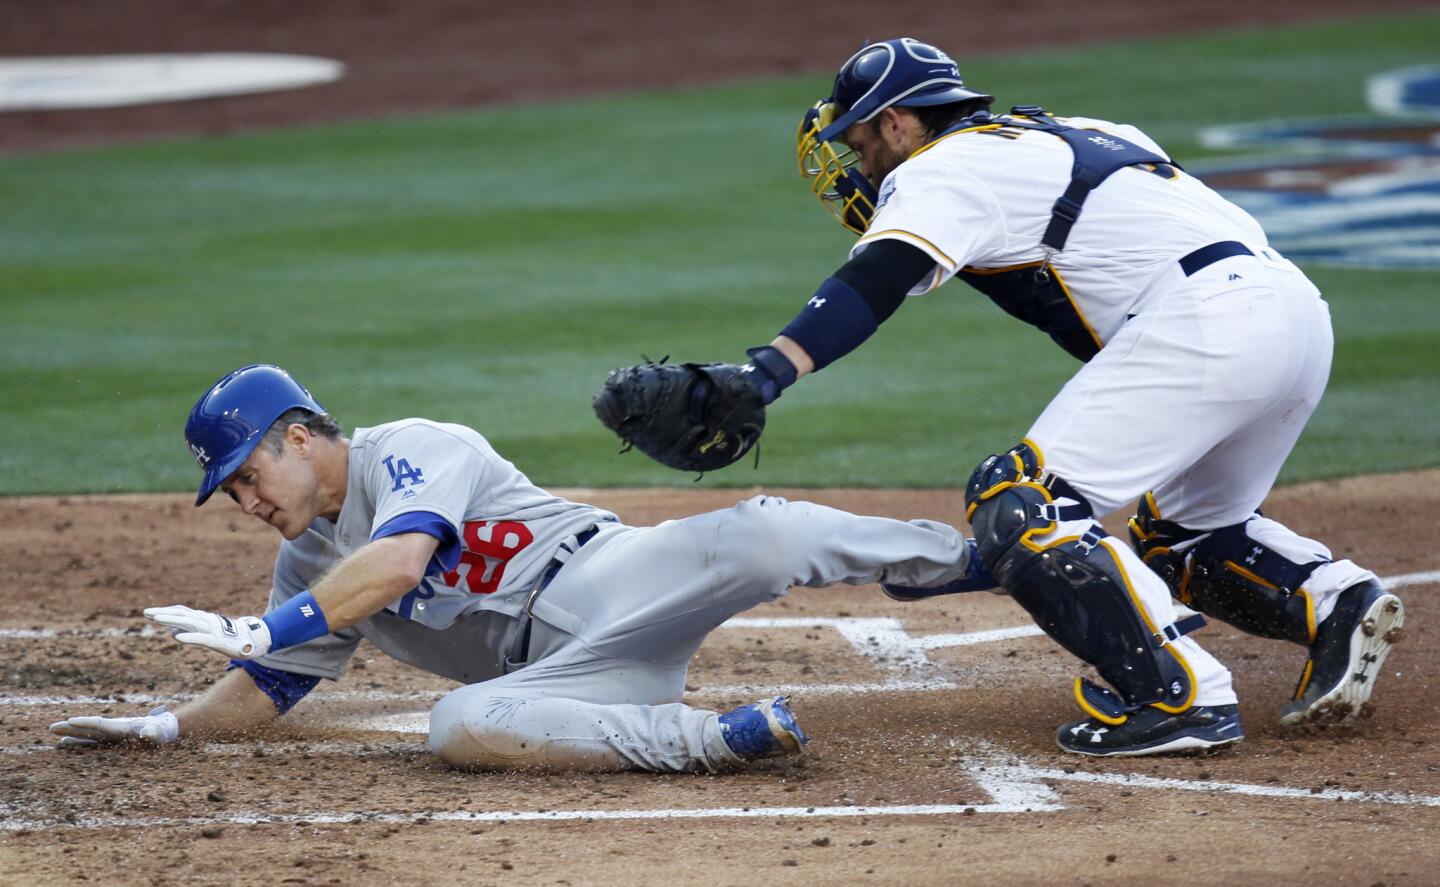 Dodgers infielder Chase Utley is tagged out by Padres catcher Derek Norris while trying to score on a Justin Turner hit in the third inning.